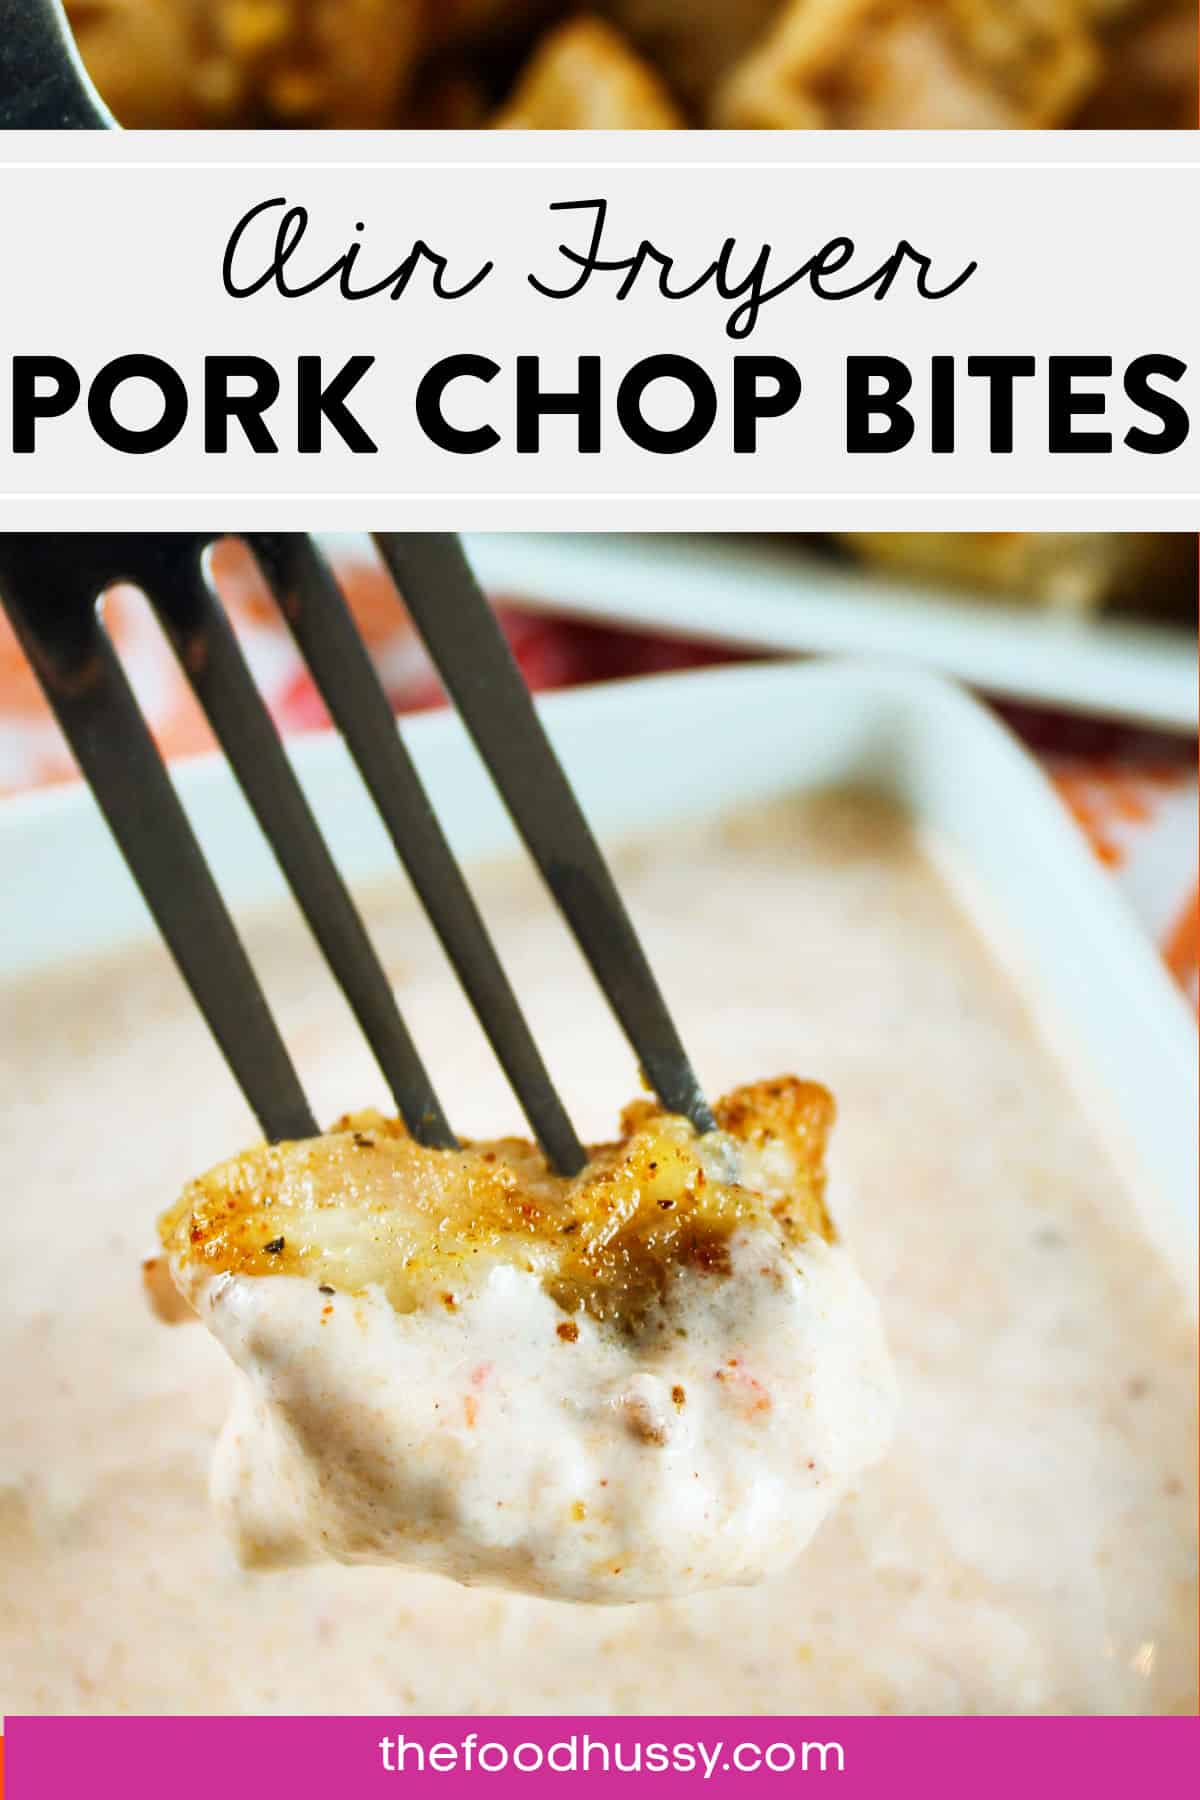 These Air Fryer Pork Chop Bites are juicy and tender! Spicy sweet flavors mix together and then finish it off with a salsa cream dipping sauce. The best part - it's done in 7 minutes of cooking time! via @foodhussy